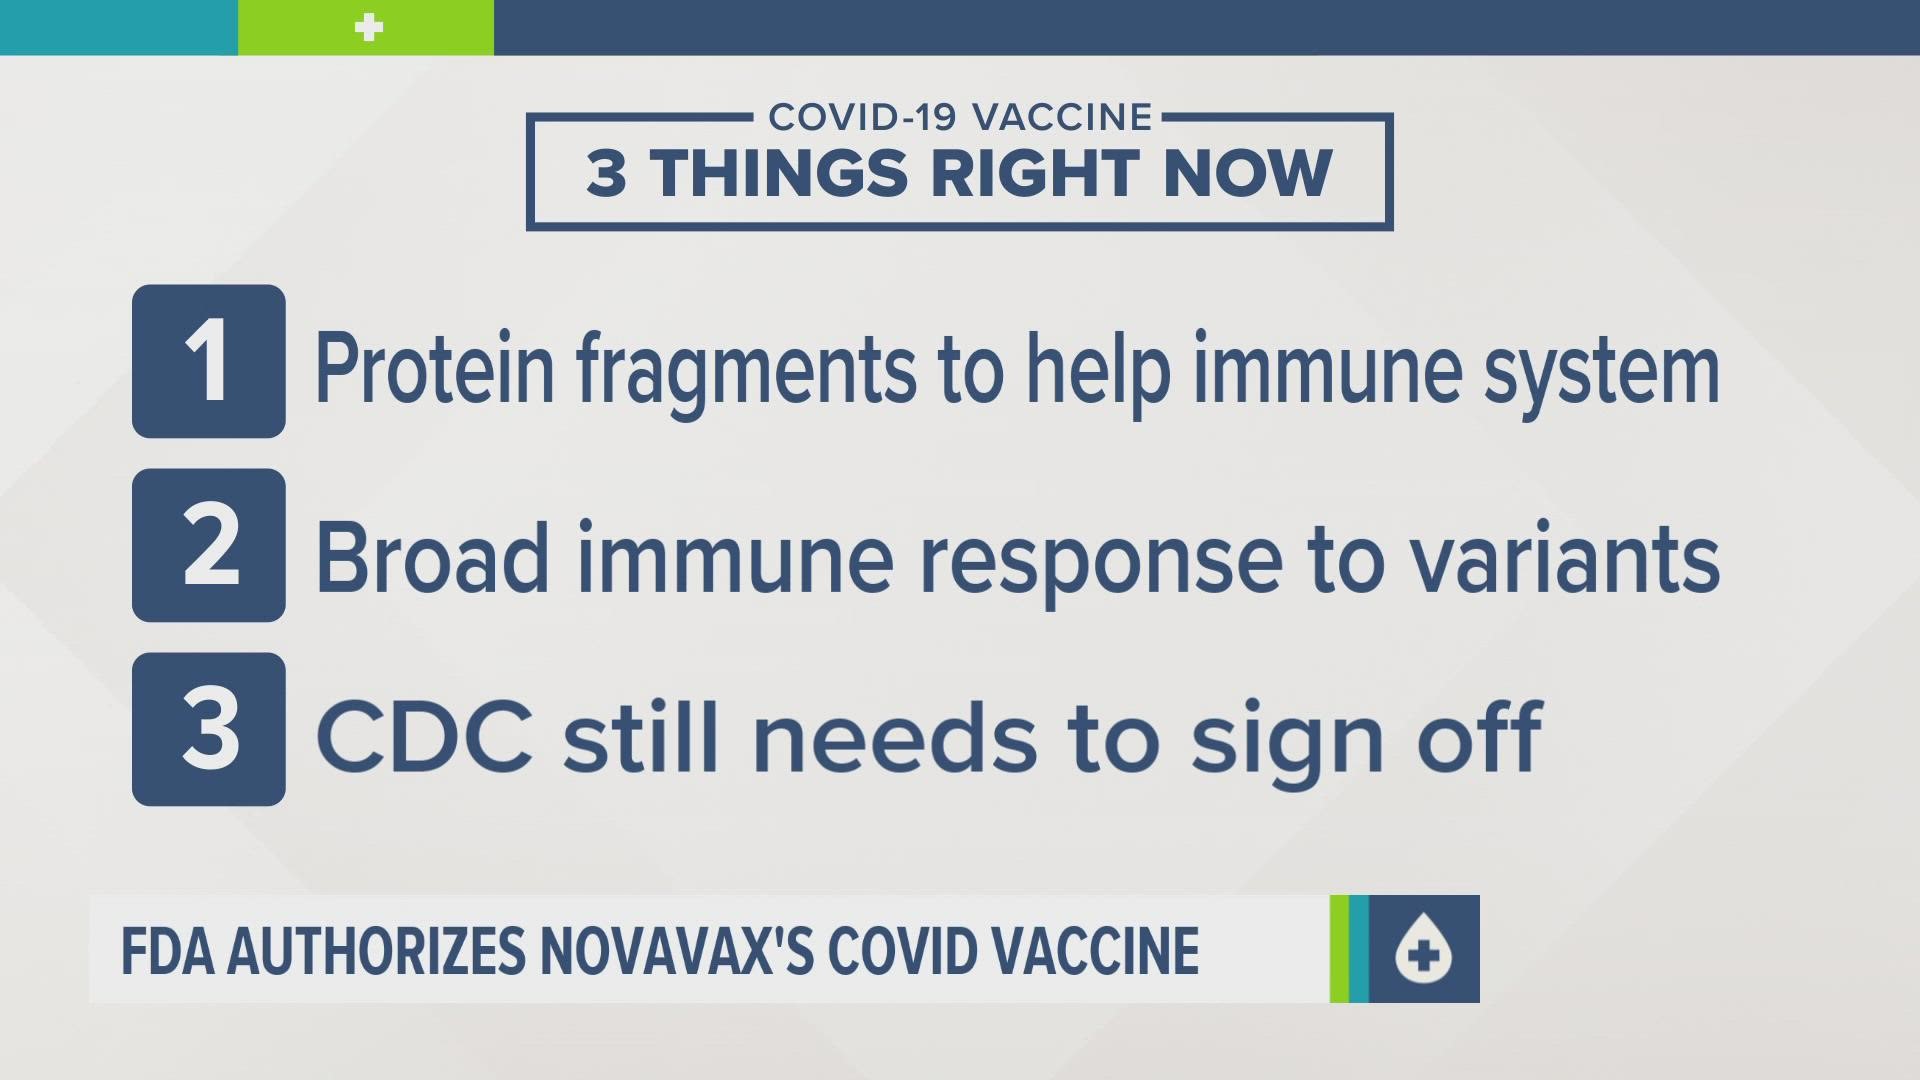 Experts expect at least some of those who remain unvaccinated to roll up their sleeves for the Novavax shot because it's a more conventional protein-based vaccine.